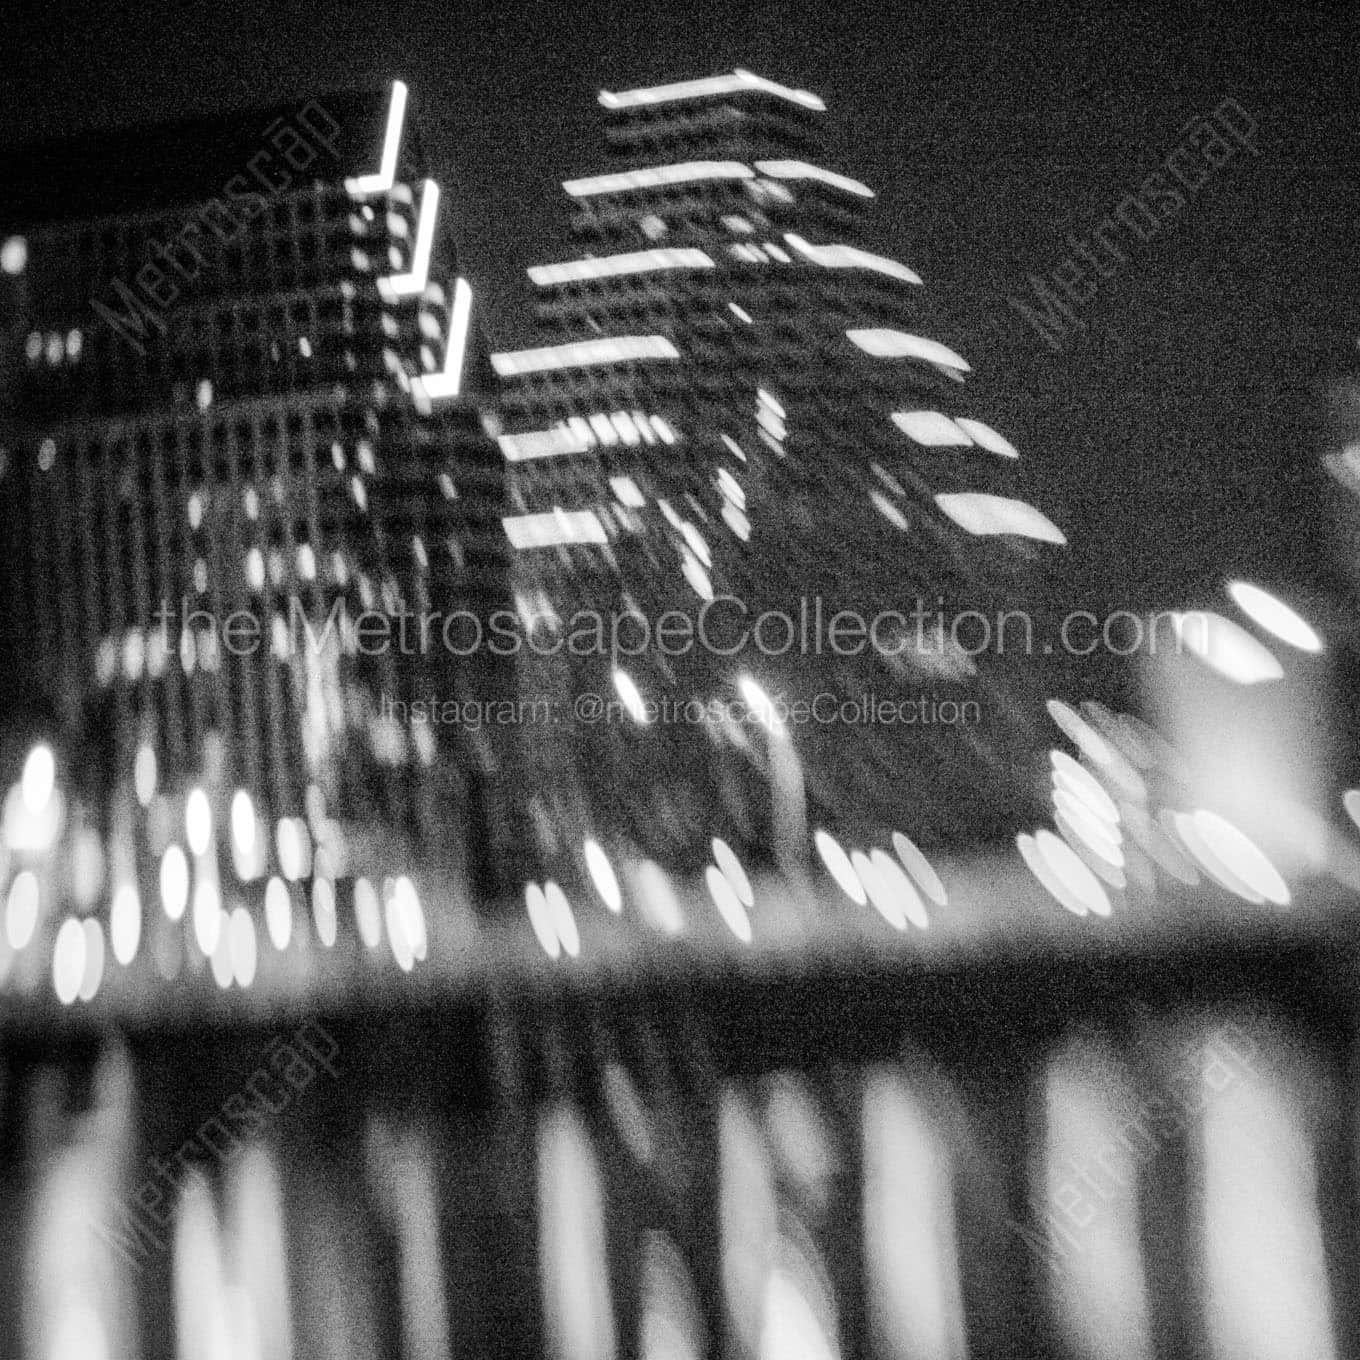 blurry picture one congress plaza building Black & White Office Art